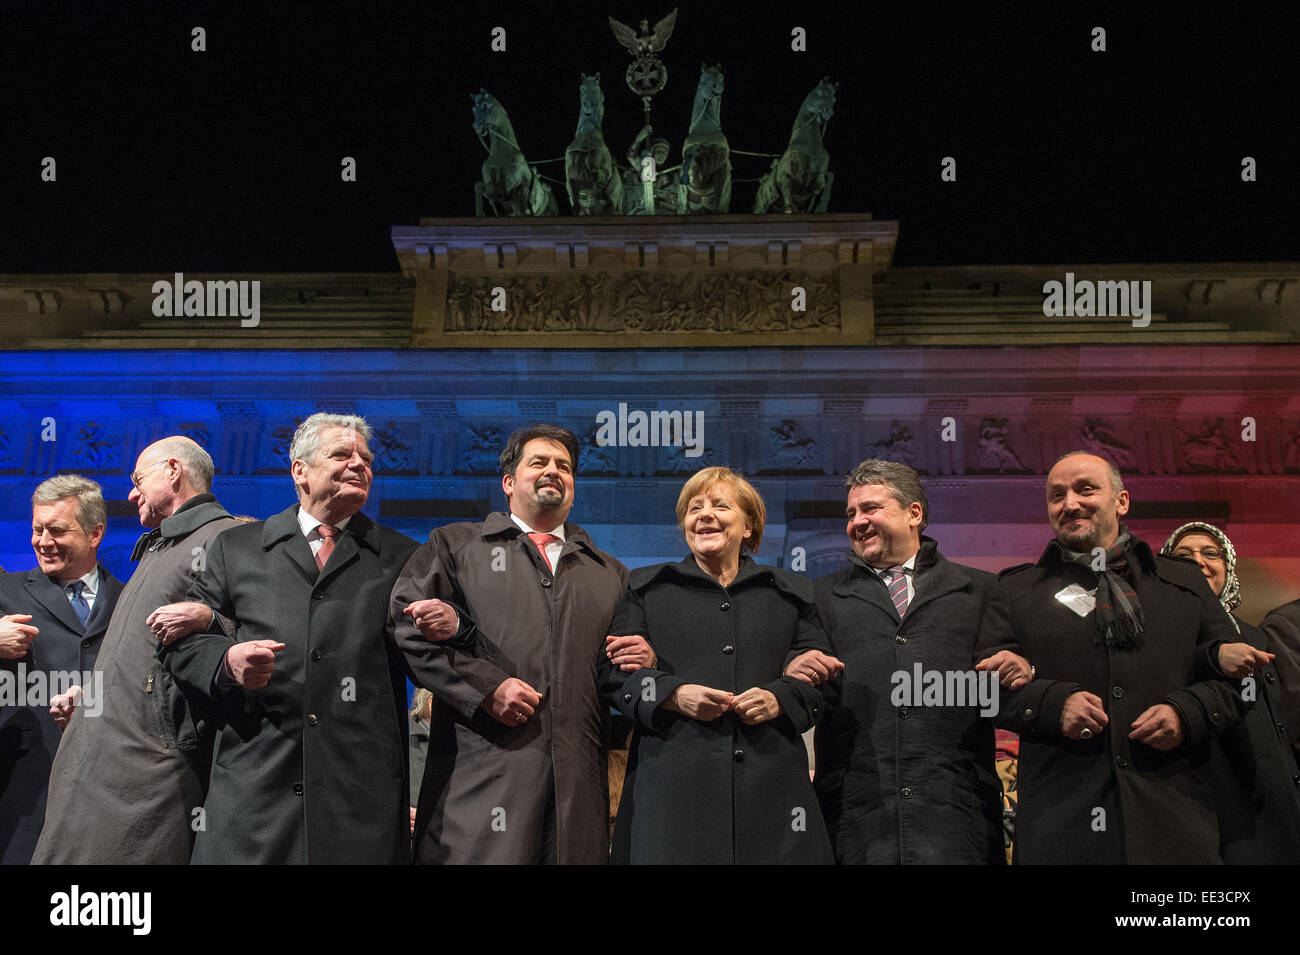 Berlin, Germany. 13th Jan, 2015. Former German President Christian Wulff, (L-R) President of the Bundestag, Norbert Lammer, German President Joachim Gauck, chairman of the Central Committee of Muslims in Germany, Aiman Mazyek, Chancellor Angela Merkel, Minister of Economic Affairs Sigmar Gabirel, and the chairman of the Turkish Community in Berlin, Bekir Yilmaz, attend a vigil for the victims of the attacks in France at the Brandenburg Gate in Berlin, Germany, 13 January 2015. Stock Photo